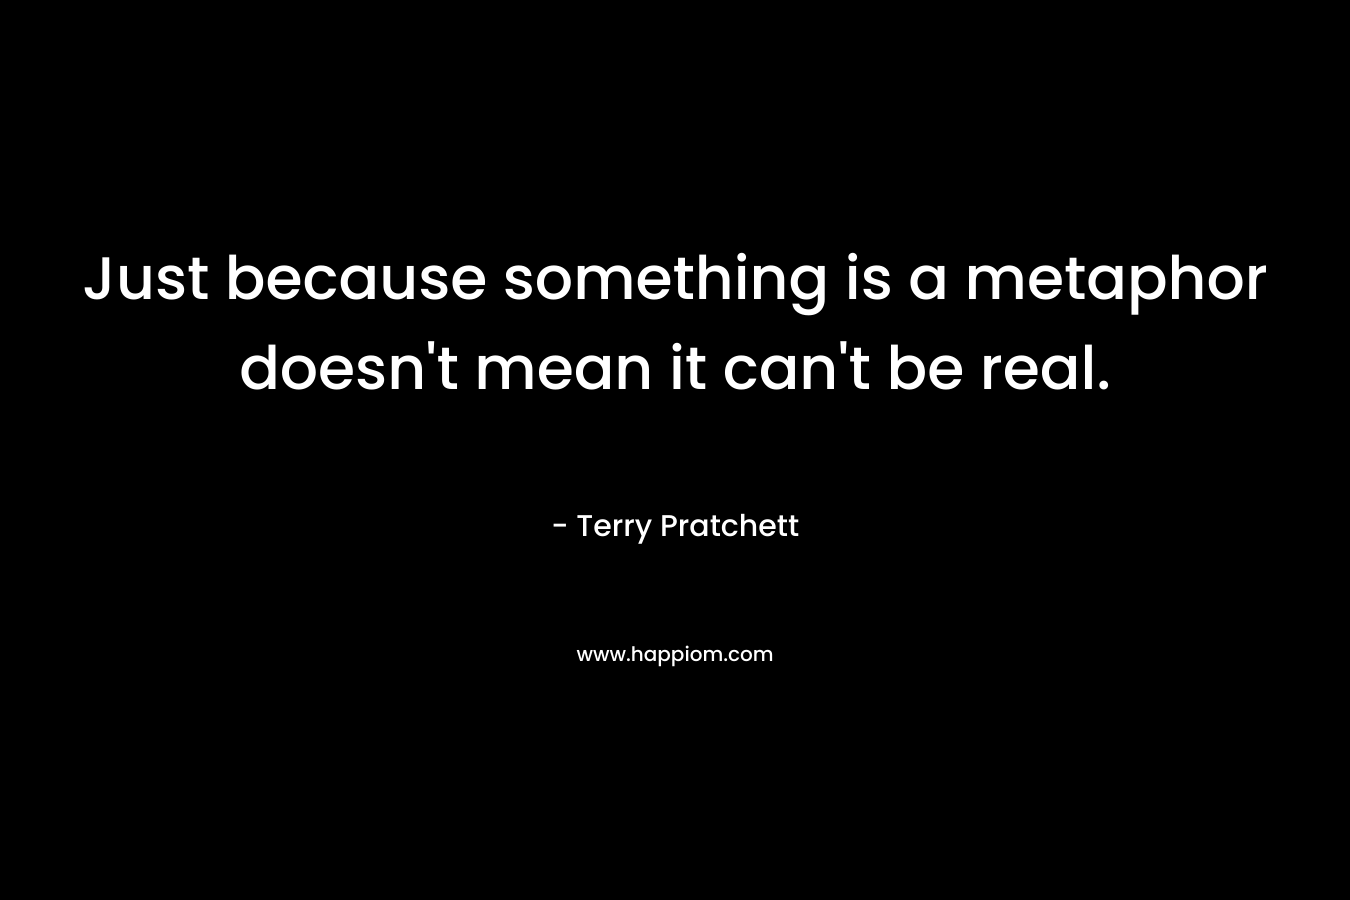 Just because something is a metaphor doesn't mean it can't be real.